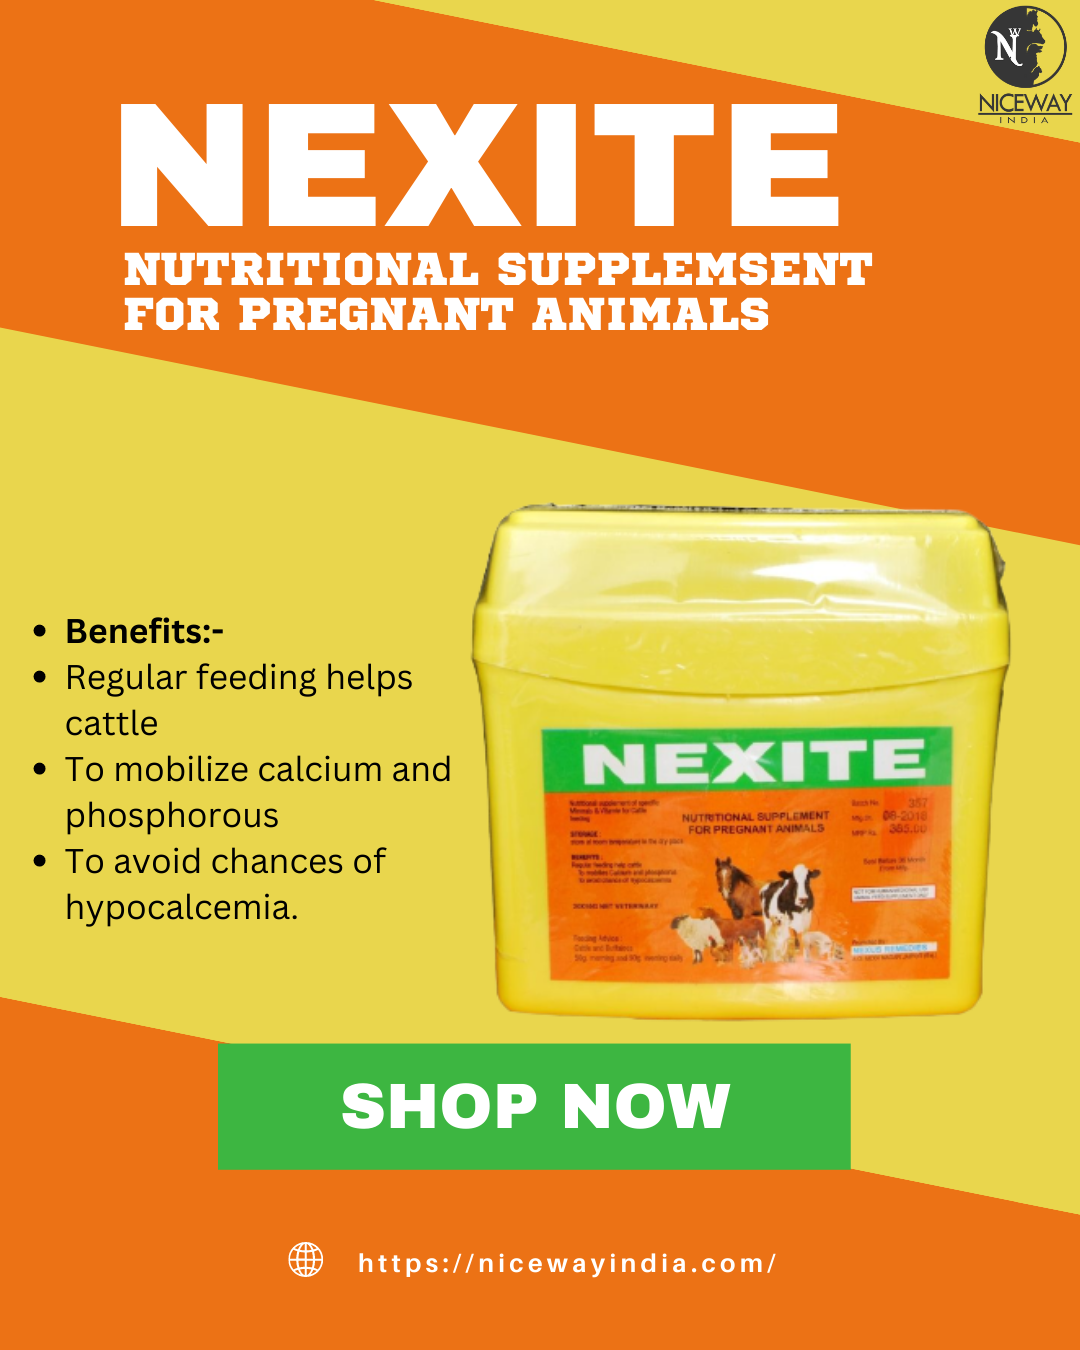 NEXITE

NUTRITIONAL SUPPLEMSENT
FOR PREGNANT ANIMALS

Benefits:-

Regular feeding helps
cattle

To mobilize calcium and
phosphorous

To avoid chances of
hypocalcemia.

  

SHOP NOW

fi https://nicewayindia.com/